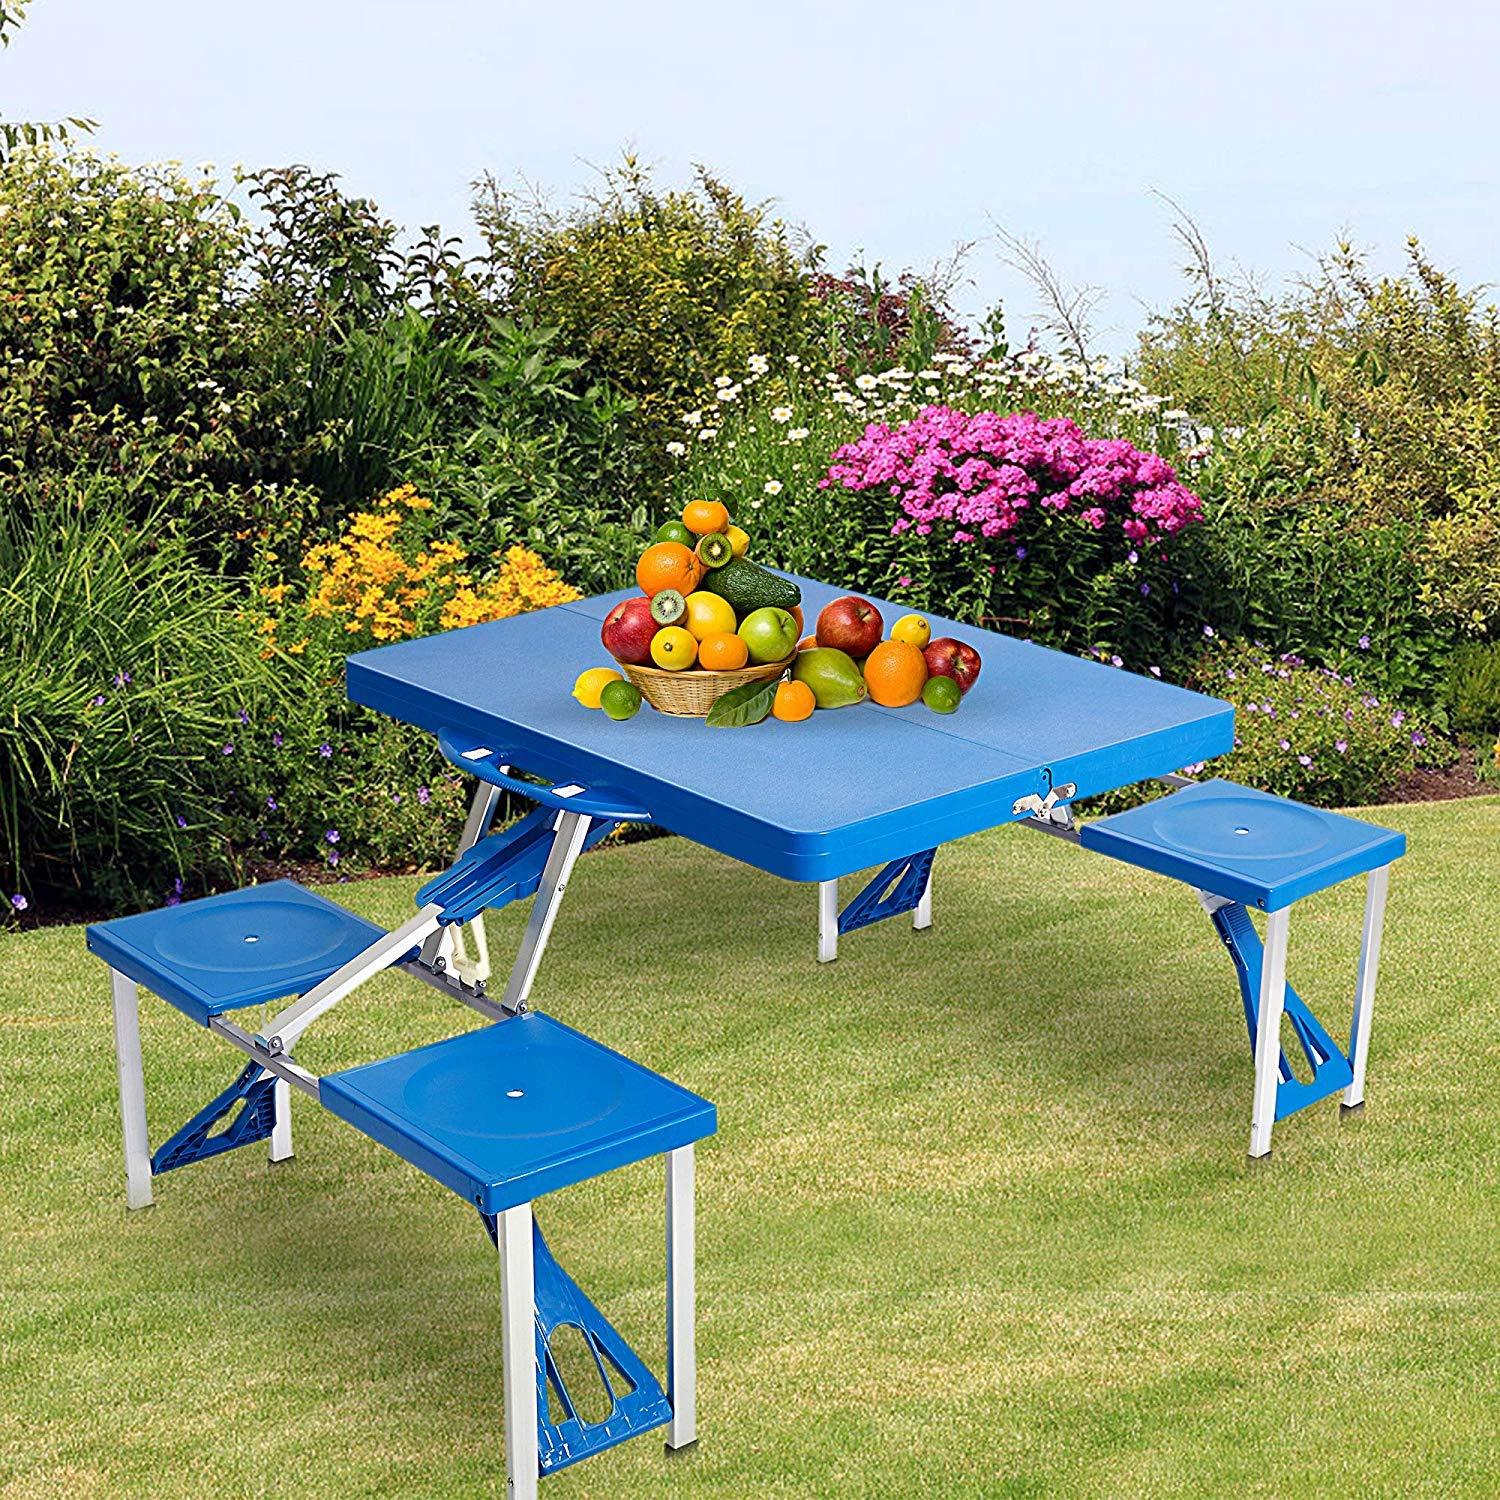 Bosonshop Lightweight Plastic Outdoor Camping Suitcase Table with Chairs,Blue